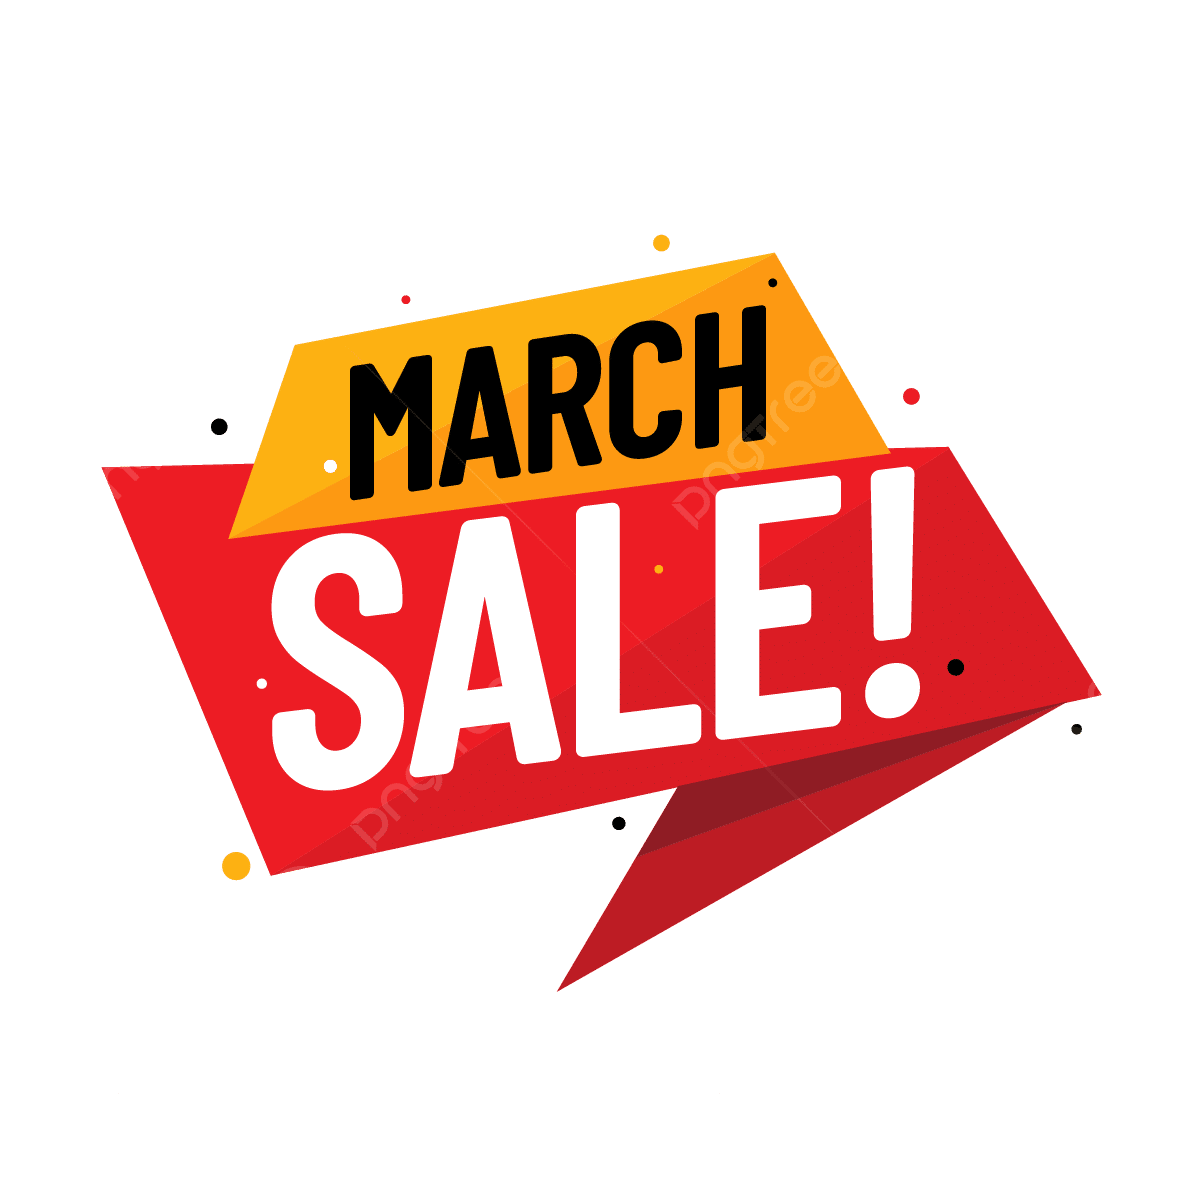 pngtree-march-sale-promotional-banner-png-image_6963342